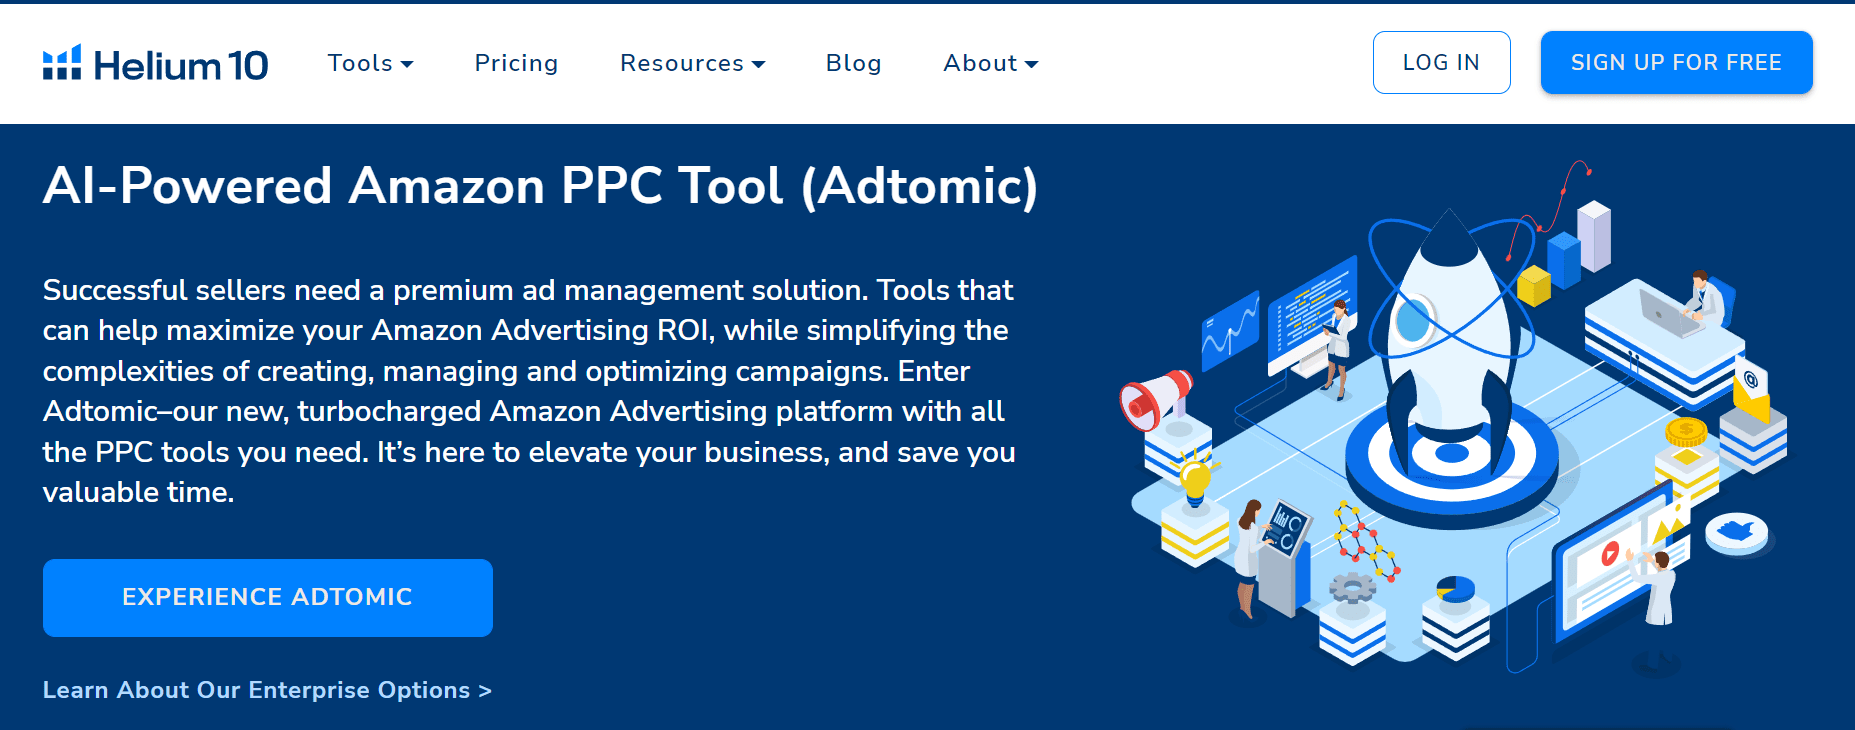 helium 10 ppc software and management